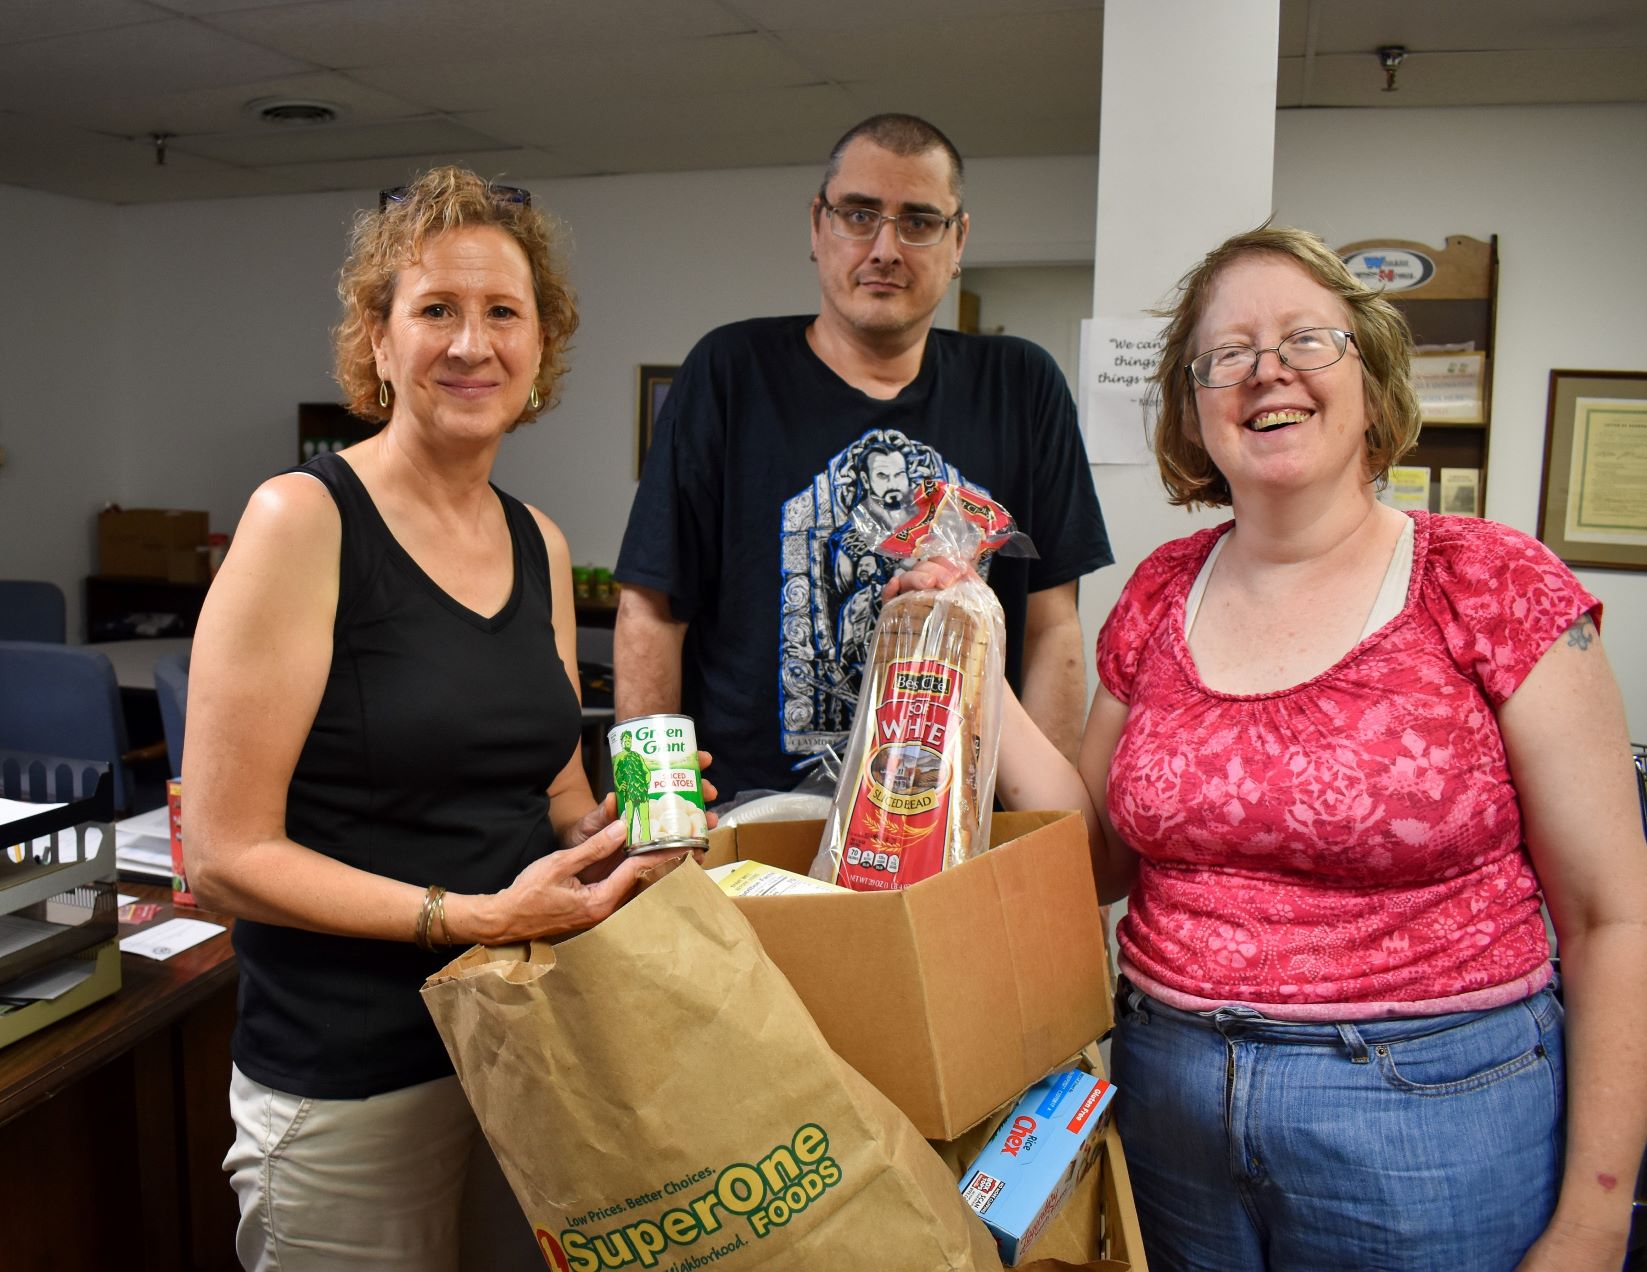 Food pantry volunteer Kathy stands with Yasna and Billy around a cart of food